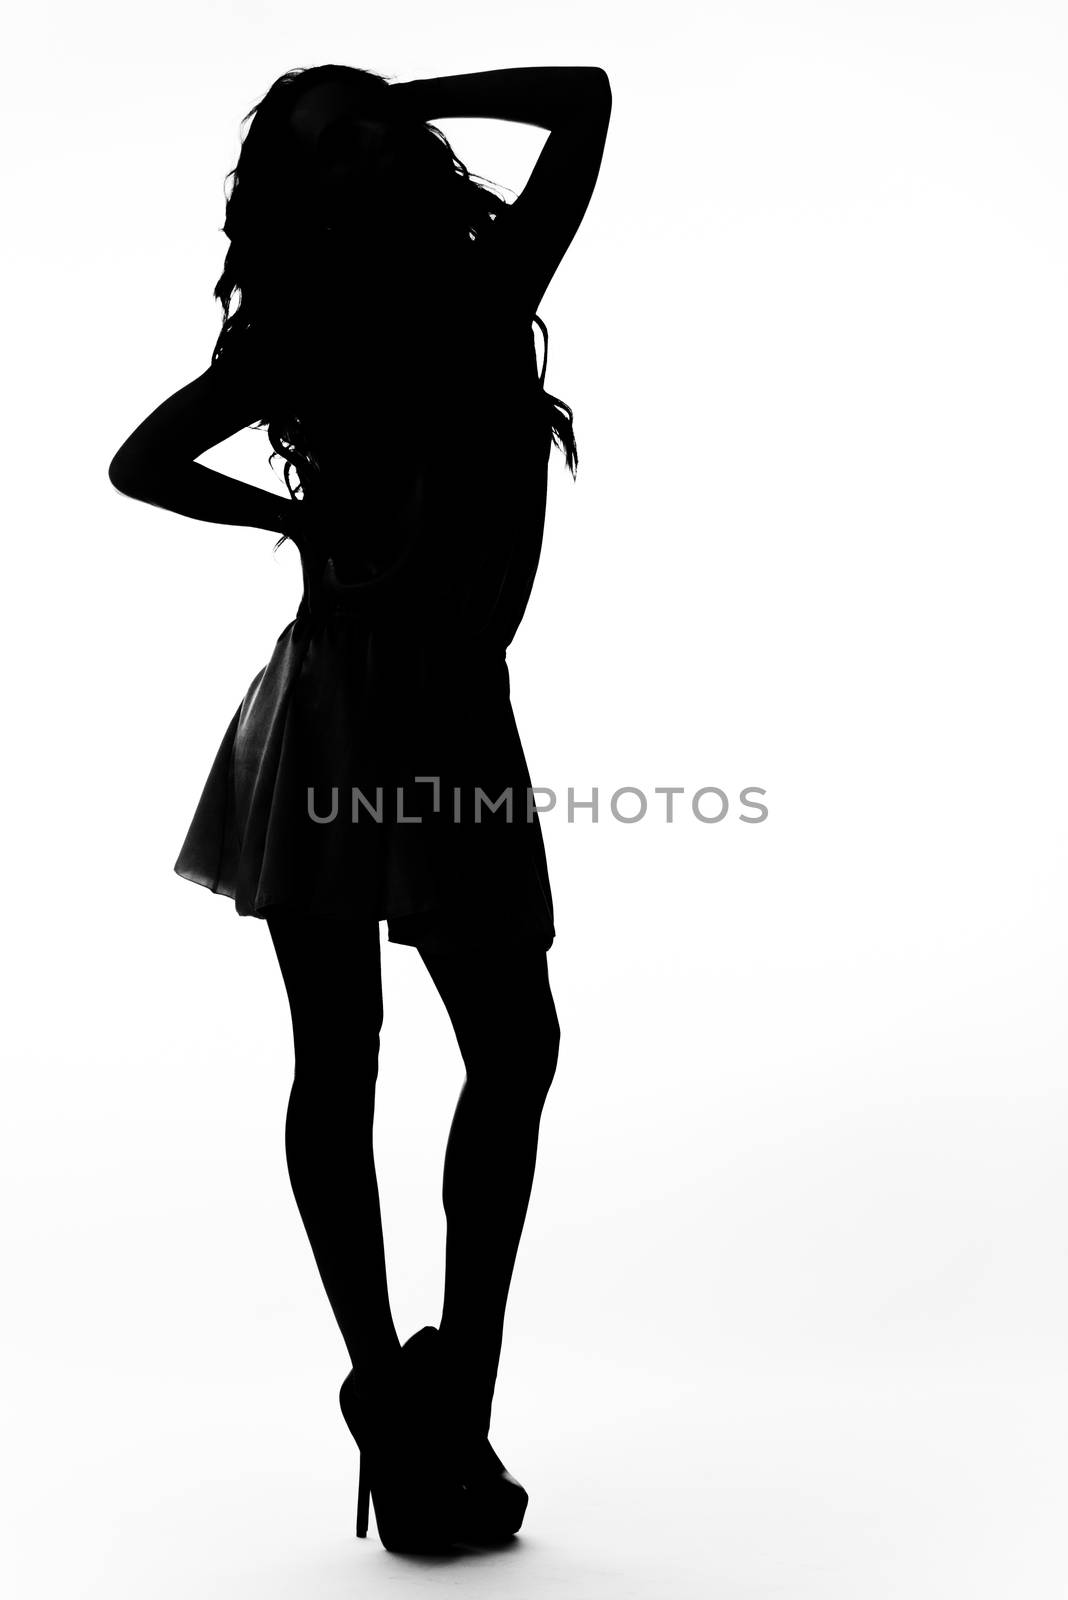 Image of an attractive young woman posing